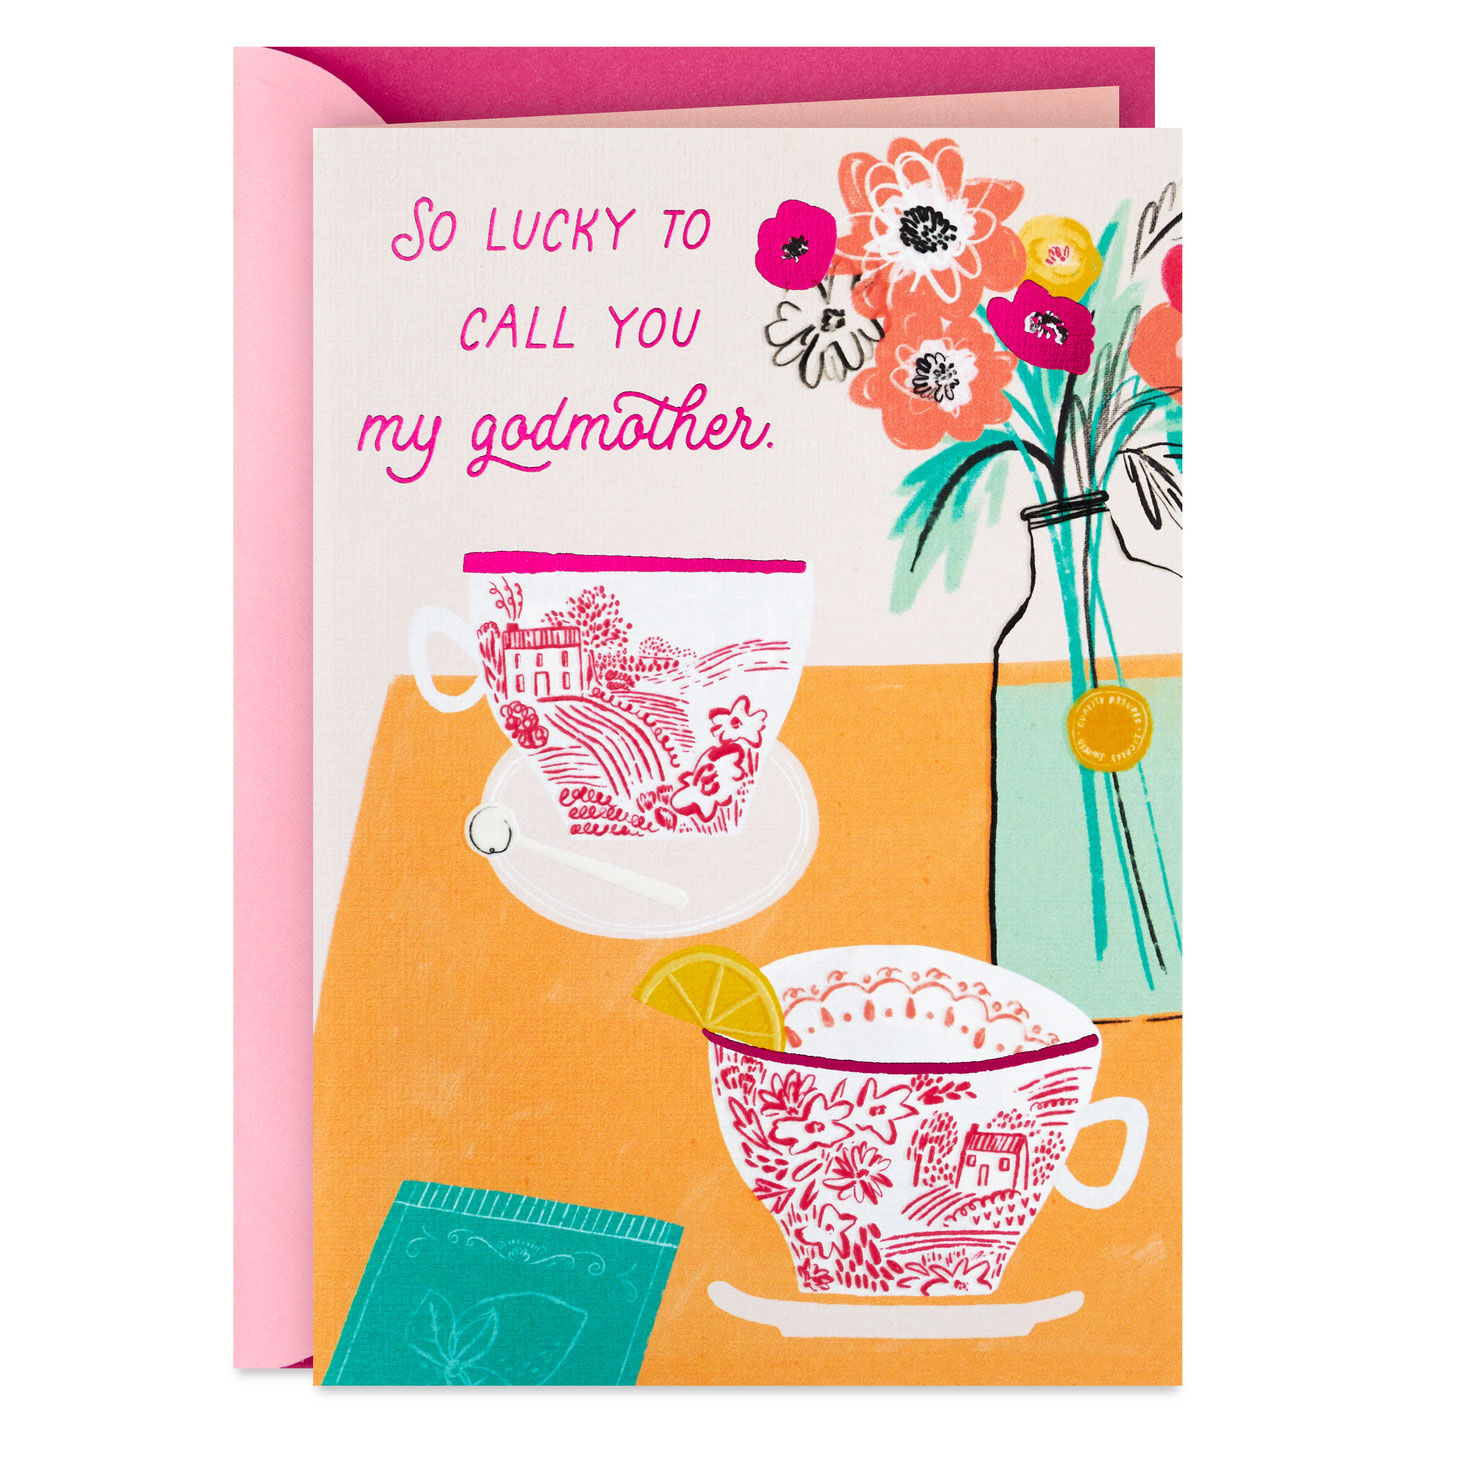 You're Truly Special Mother's Day Card for Godmother for only USD 4.59 | Hallmark